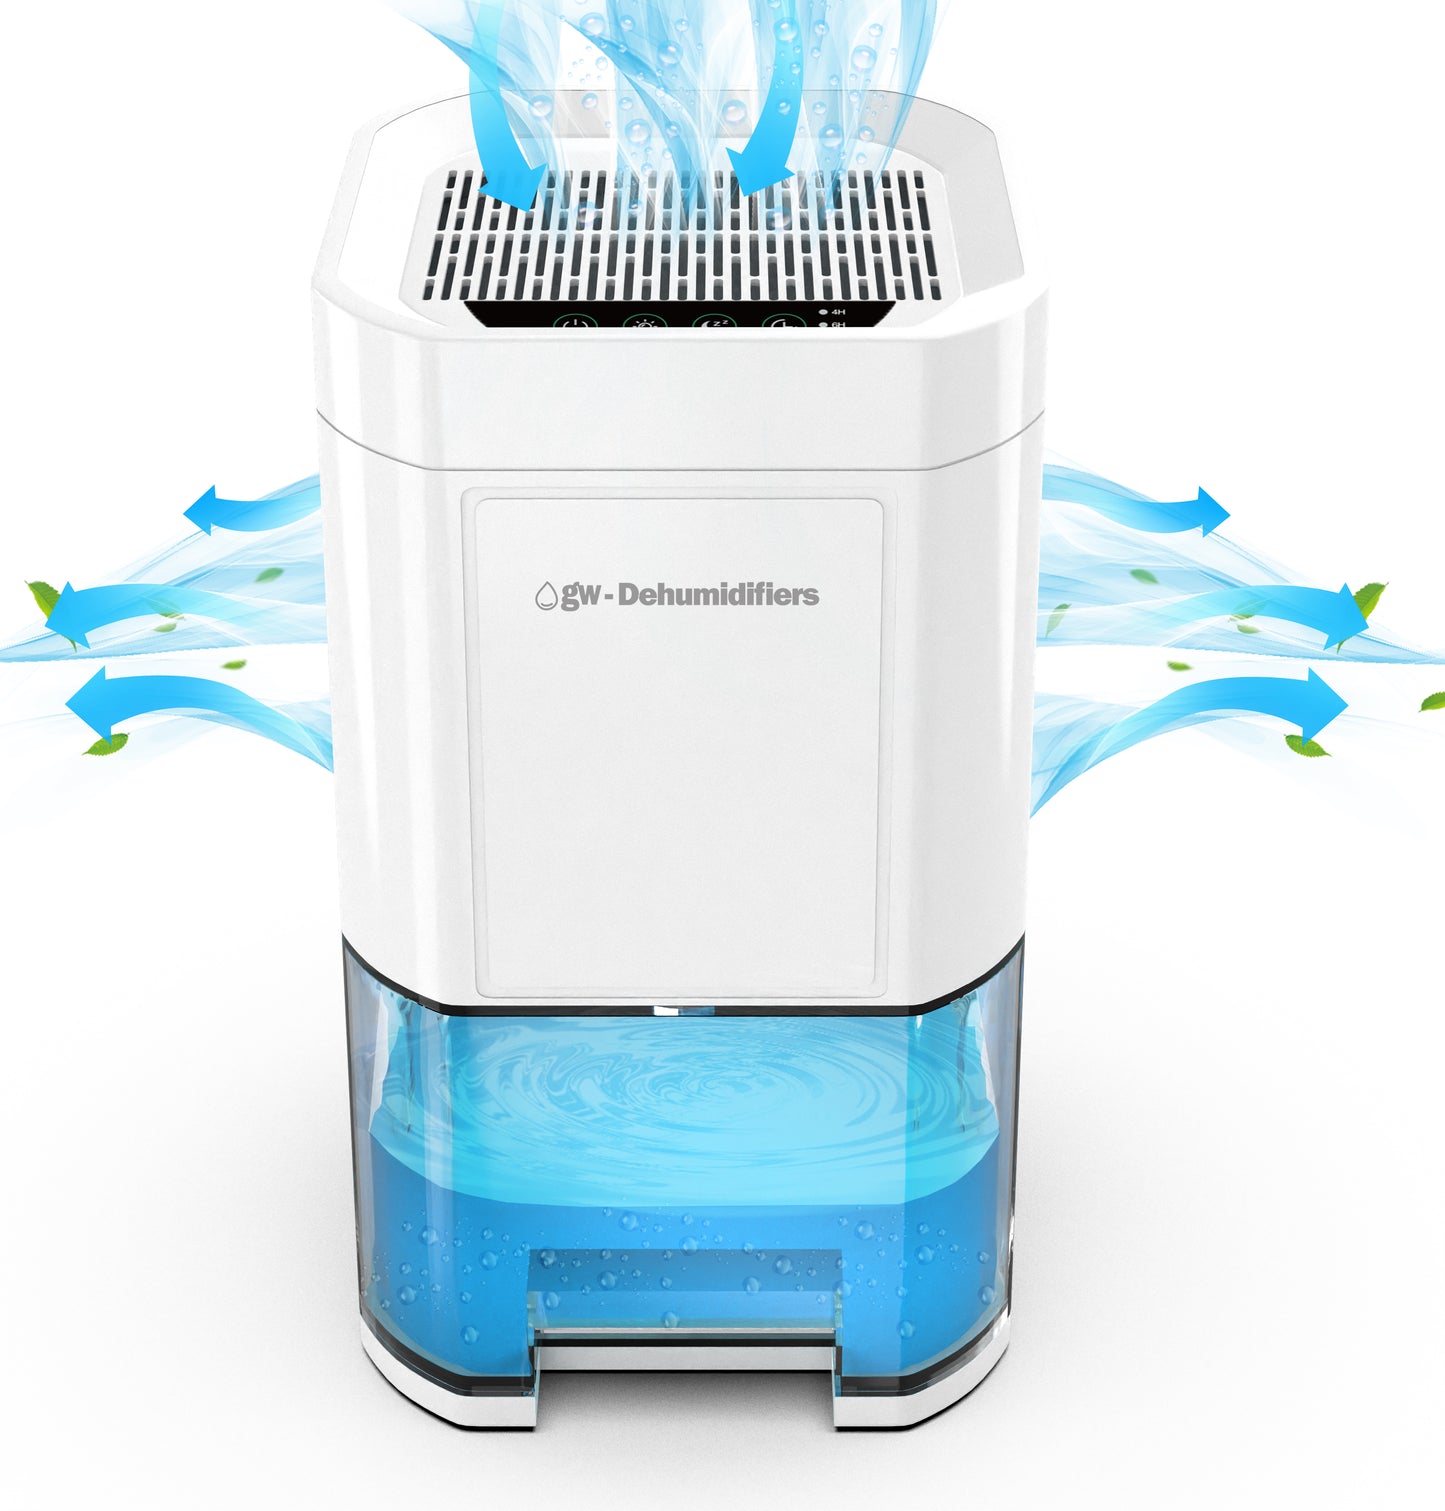 1000ml Gw-Dehumidifiers for Home Damp - Sleep Mode &amp; 7 Timer Options - Quiet Dehumidifier for Bedroom - Portable &amp; Auto Turn Off -Energy Efficient for Drying Clothes, Mildew Prevention &amp;Bathroom